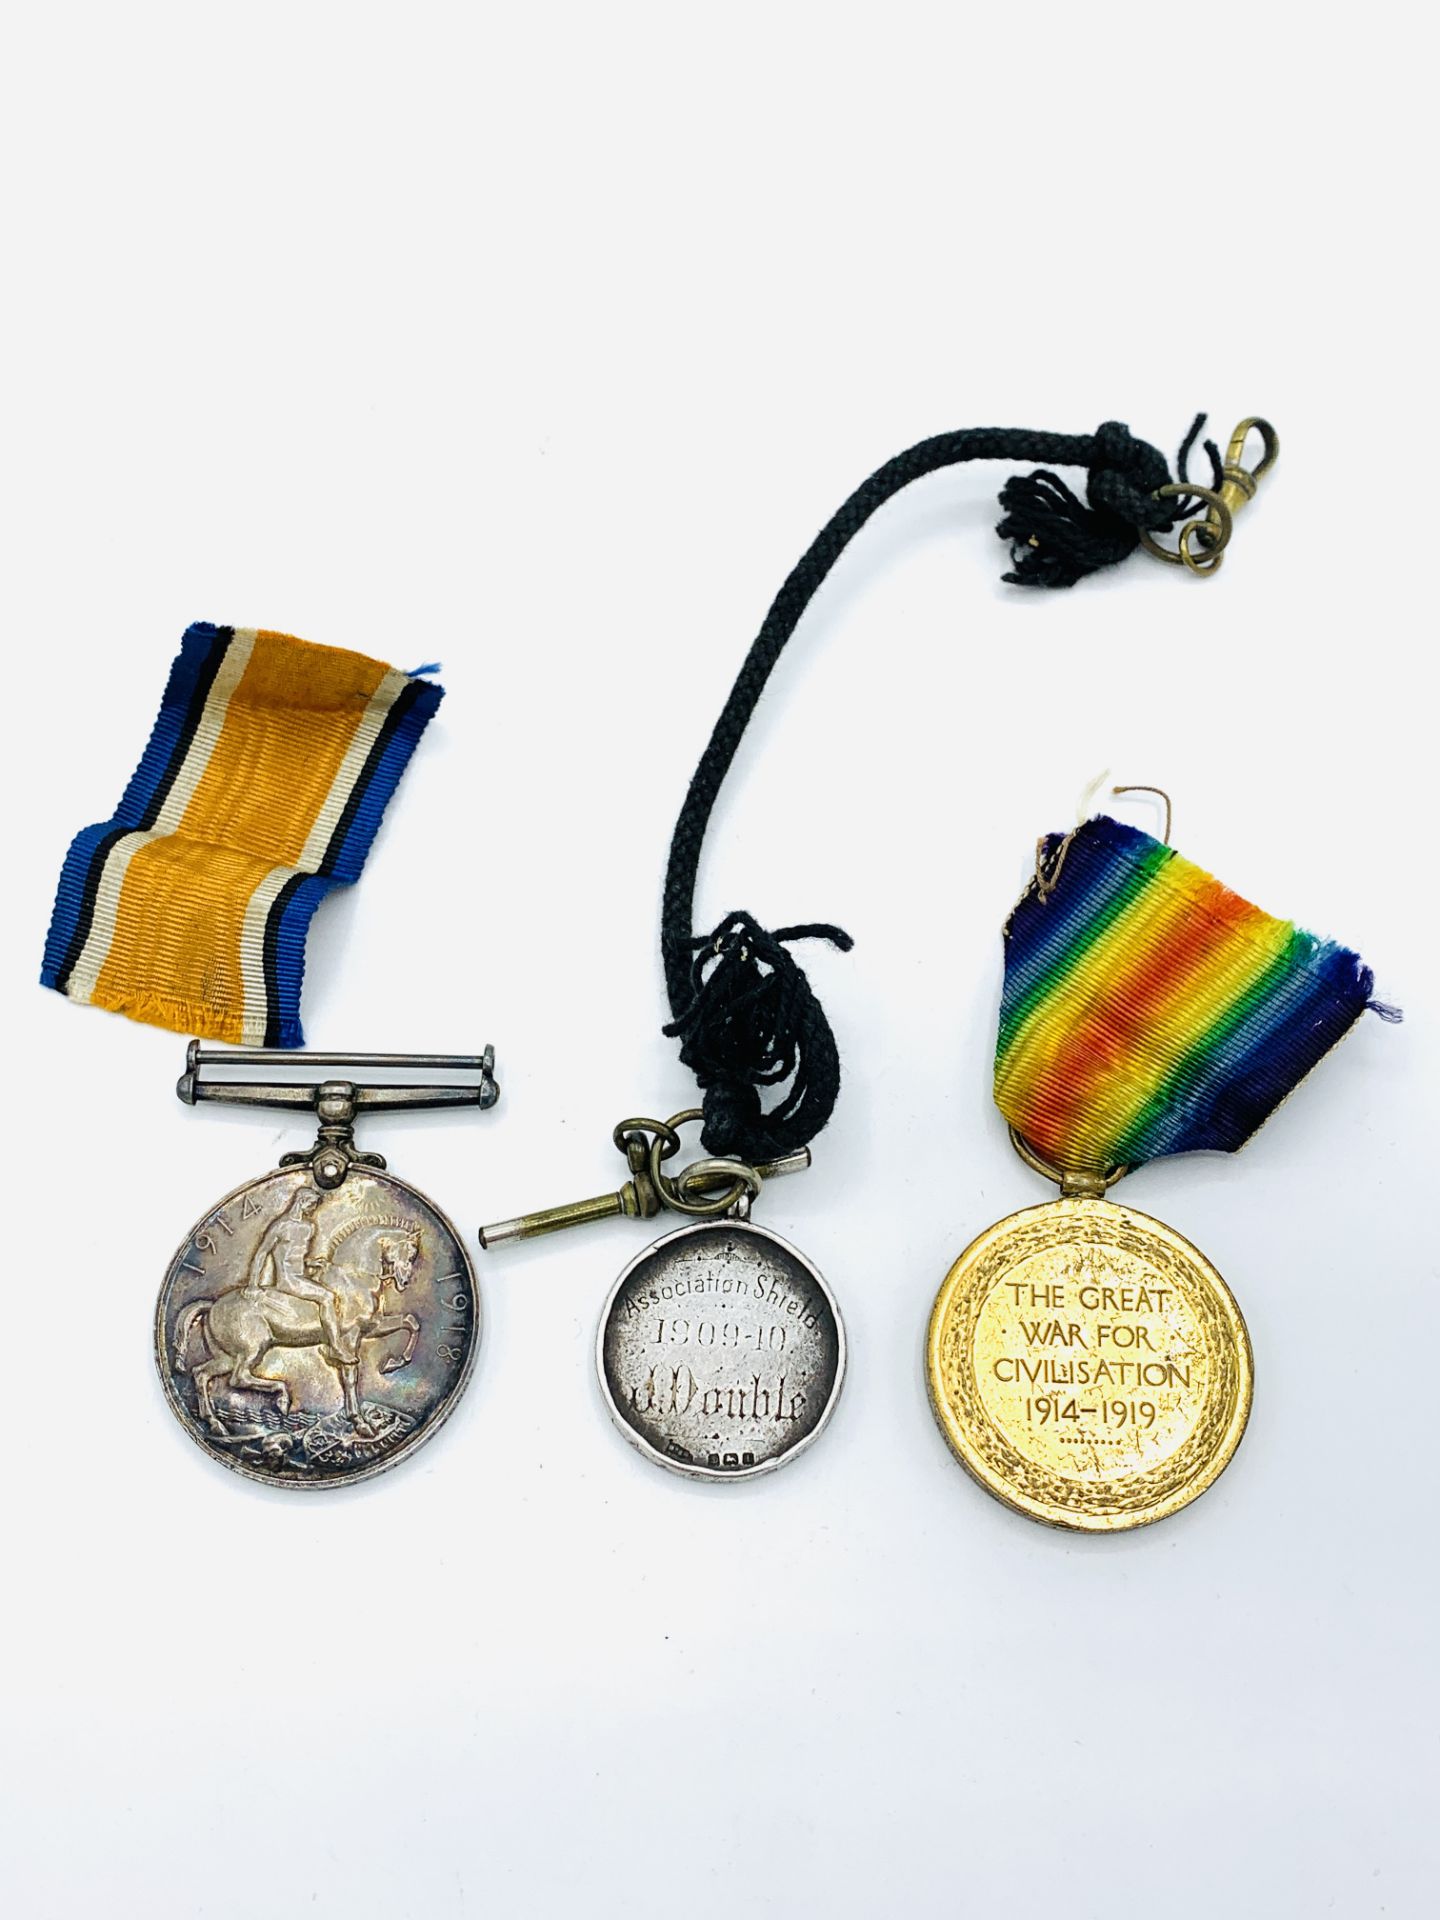 Two World War I medals and a 1909-10 Royal Engineers Medal - Image 2 of 2